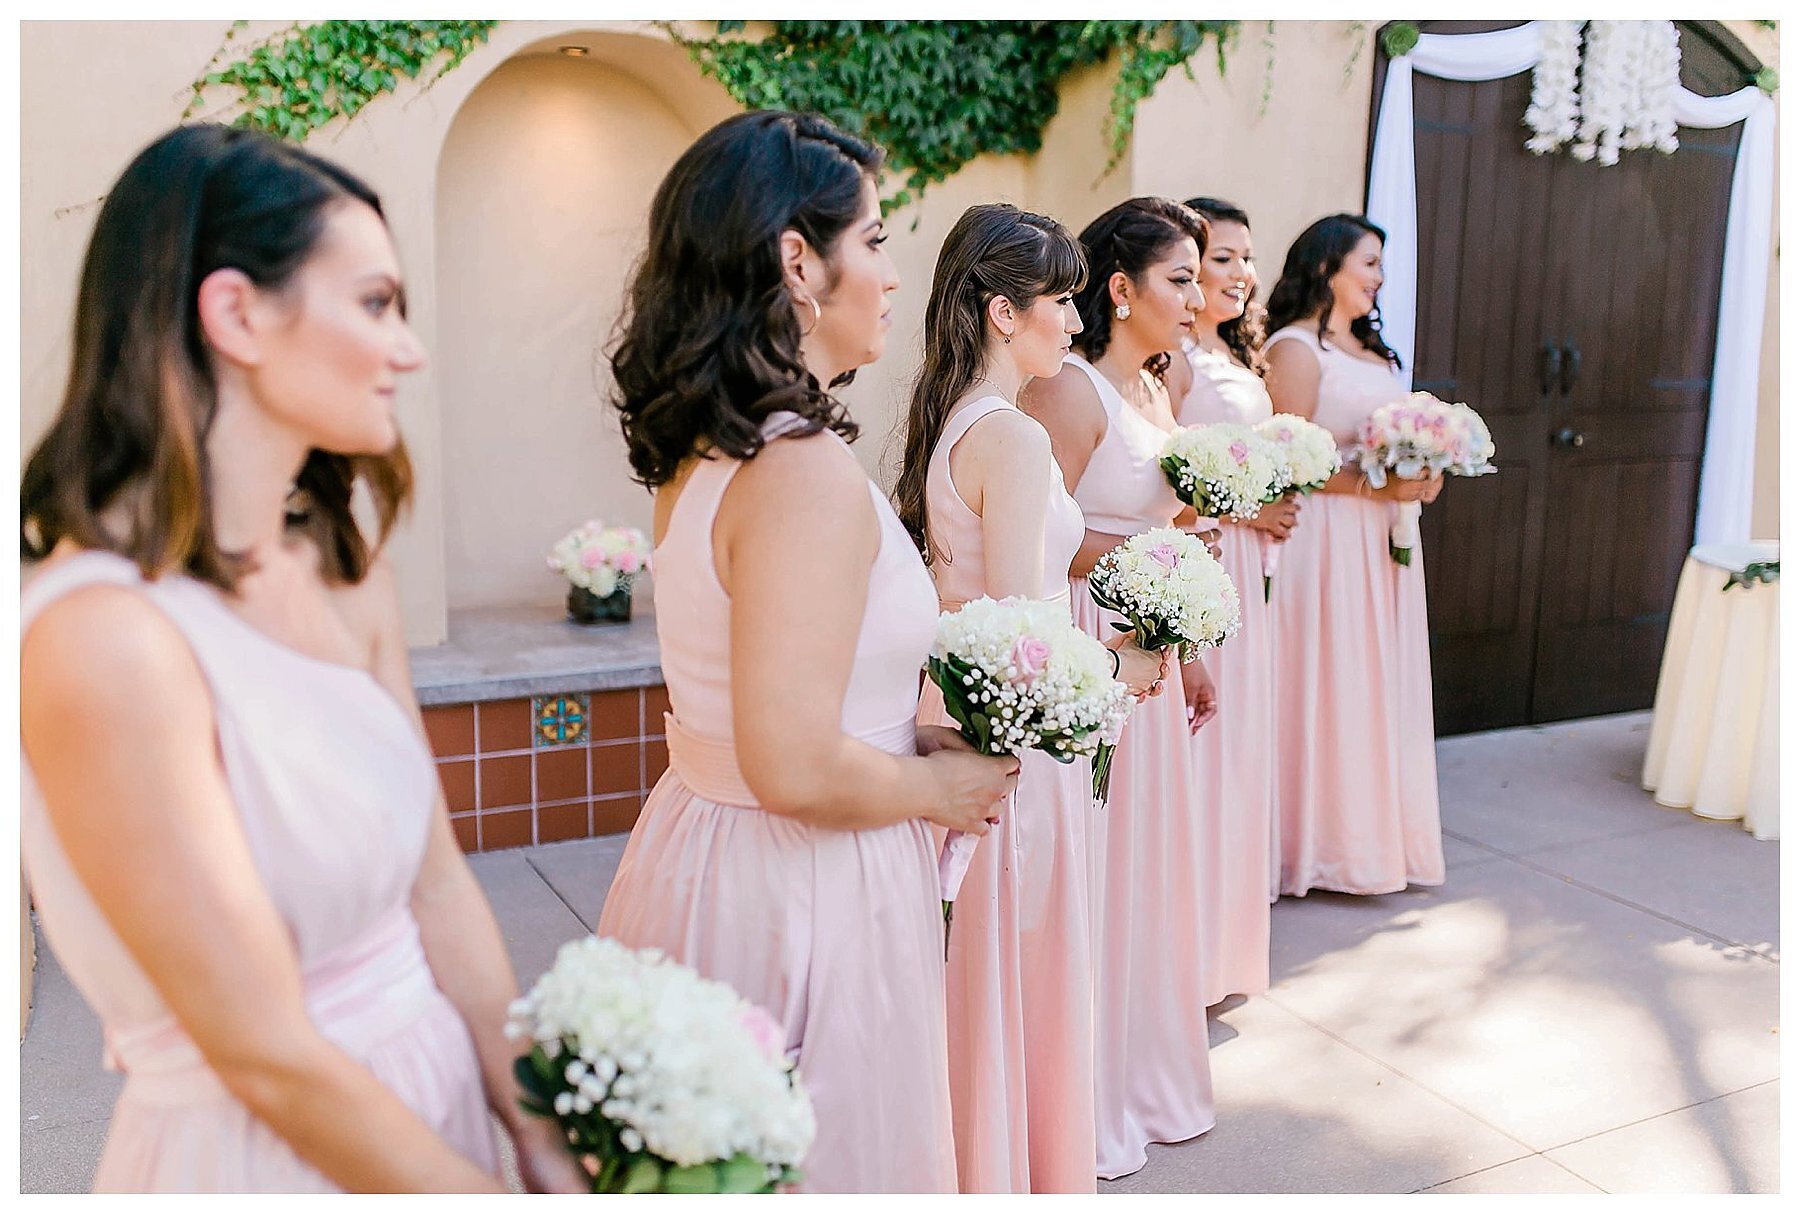  bridesmaids lined up at the altar for the wedding ceremony 